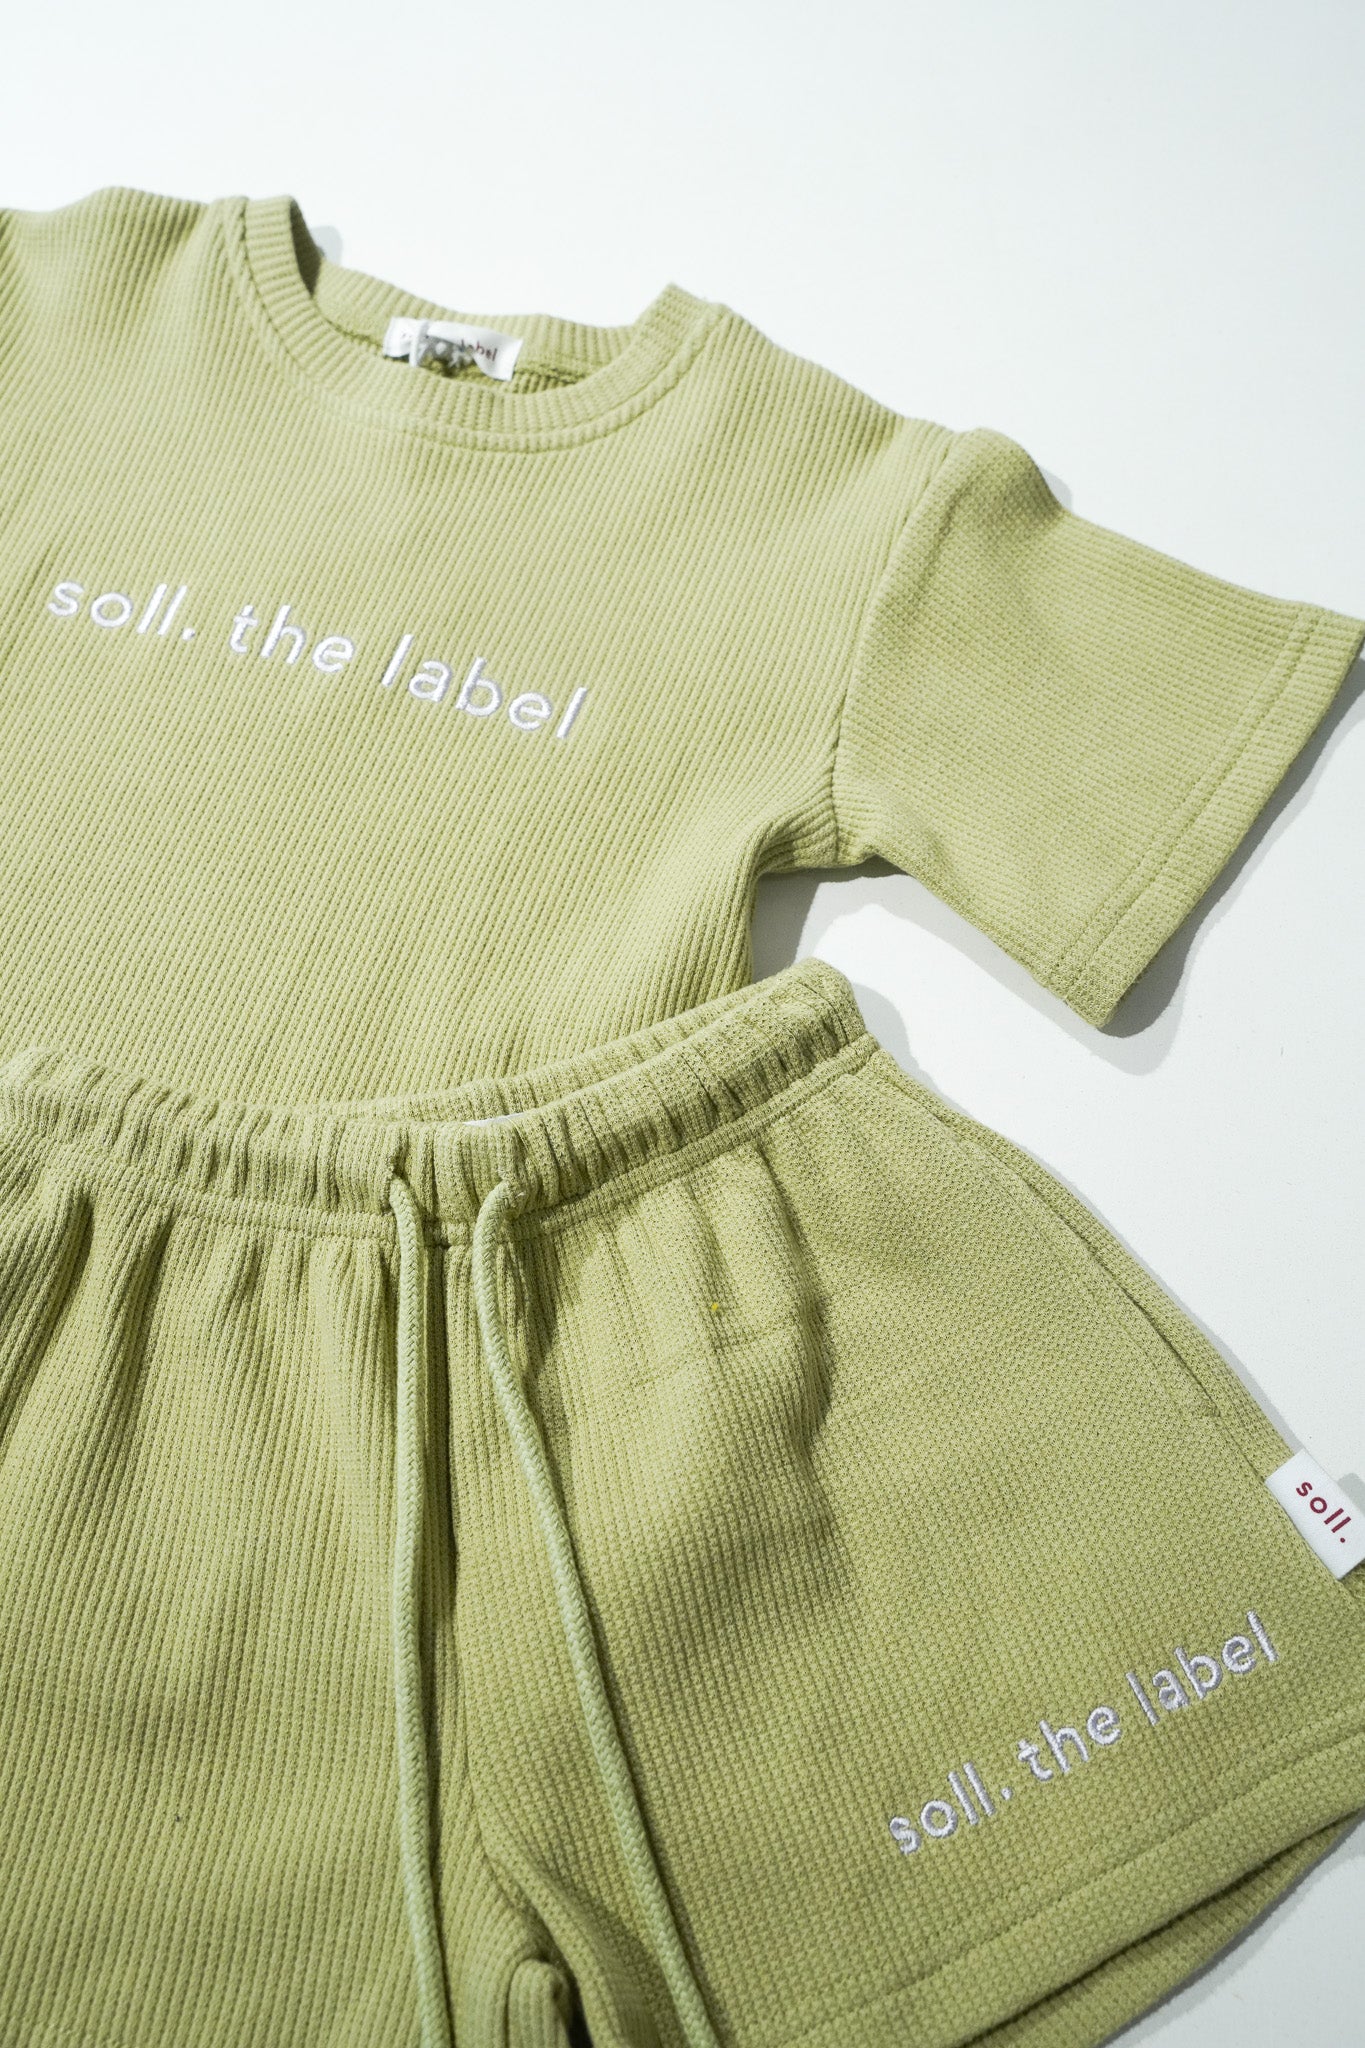 Soll the Label – Lune and Sol Boutique